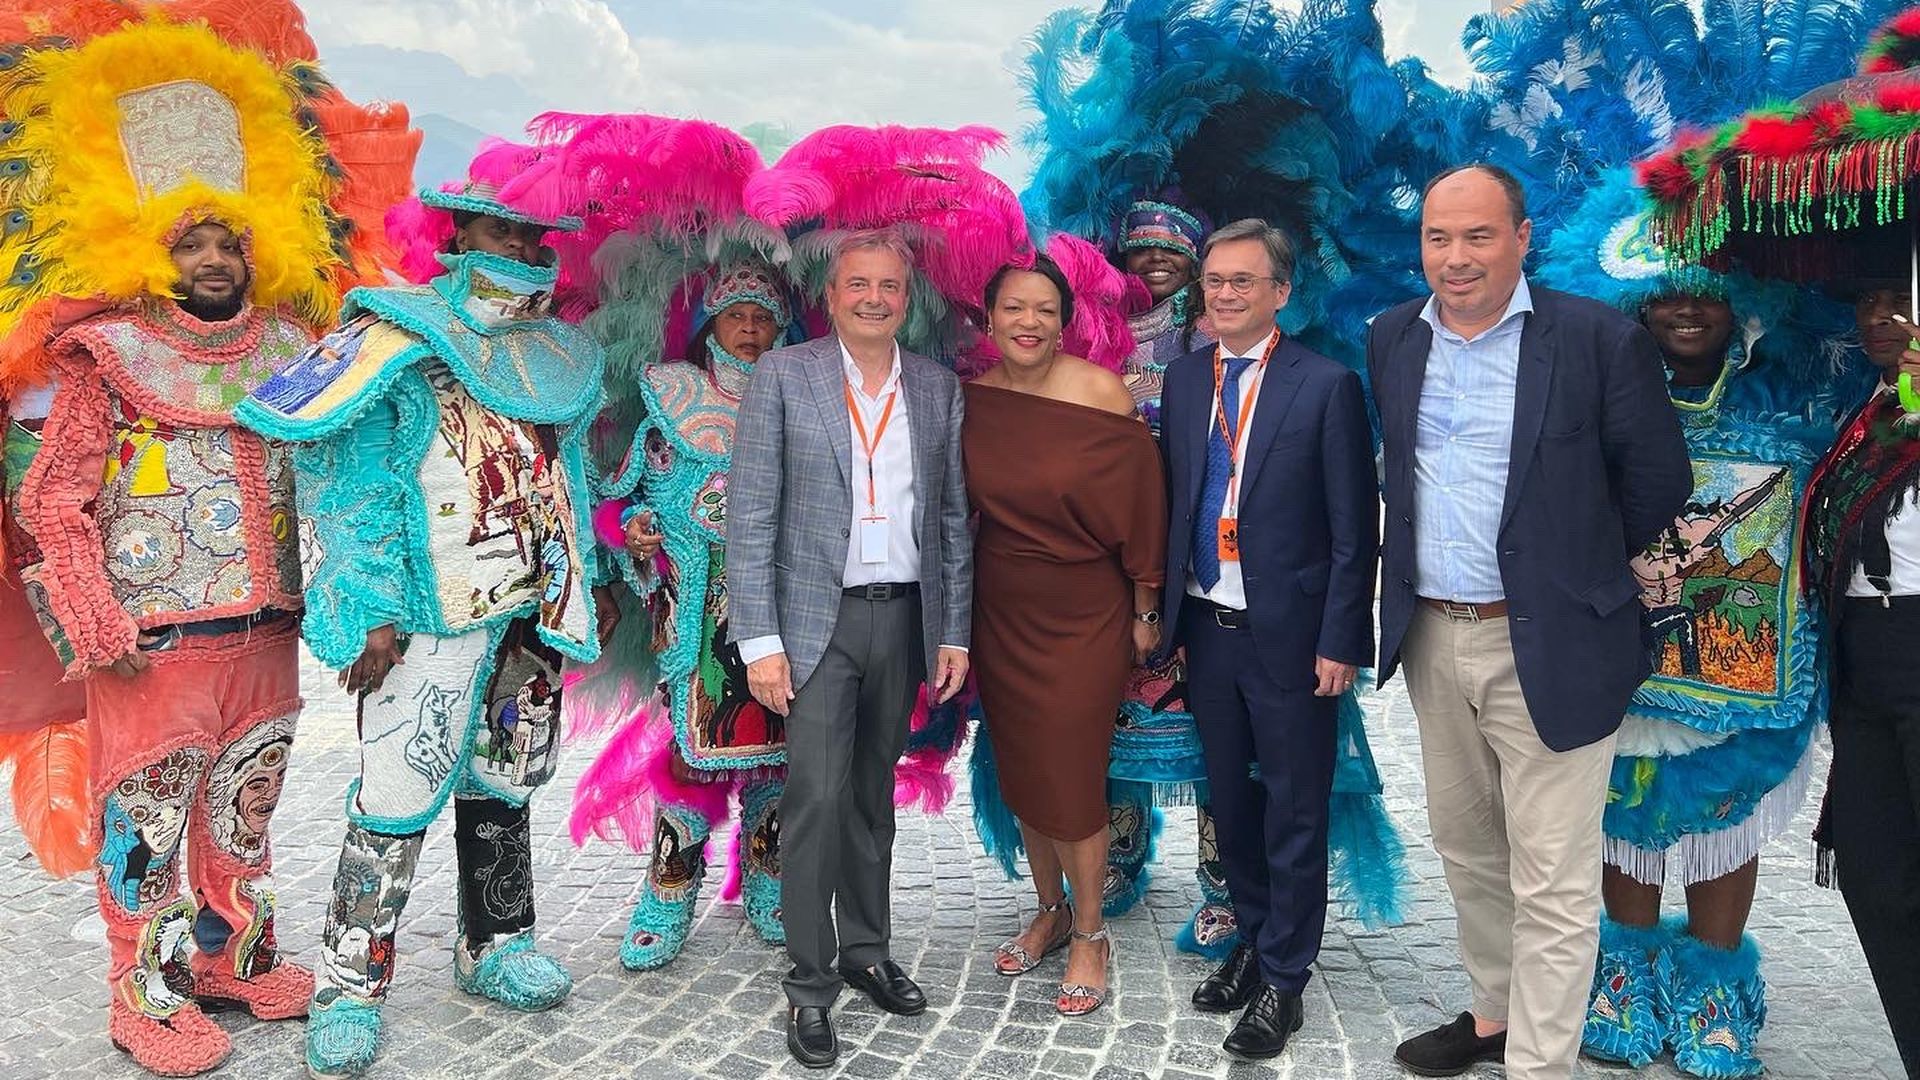 Photo shows Mayor Cantrell and other dignitaries in Switzerland